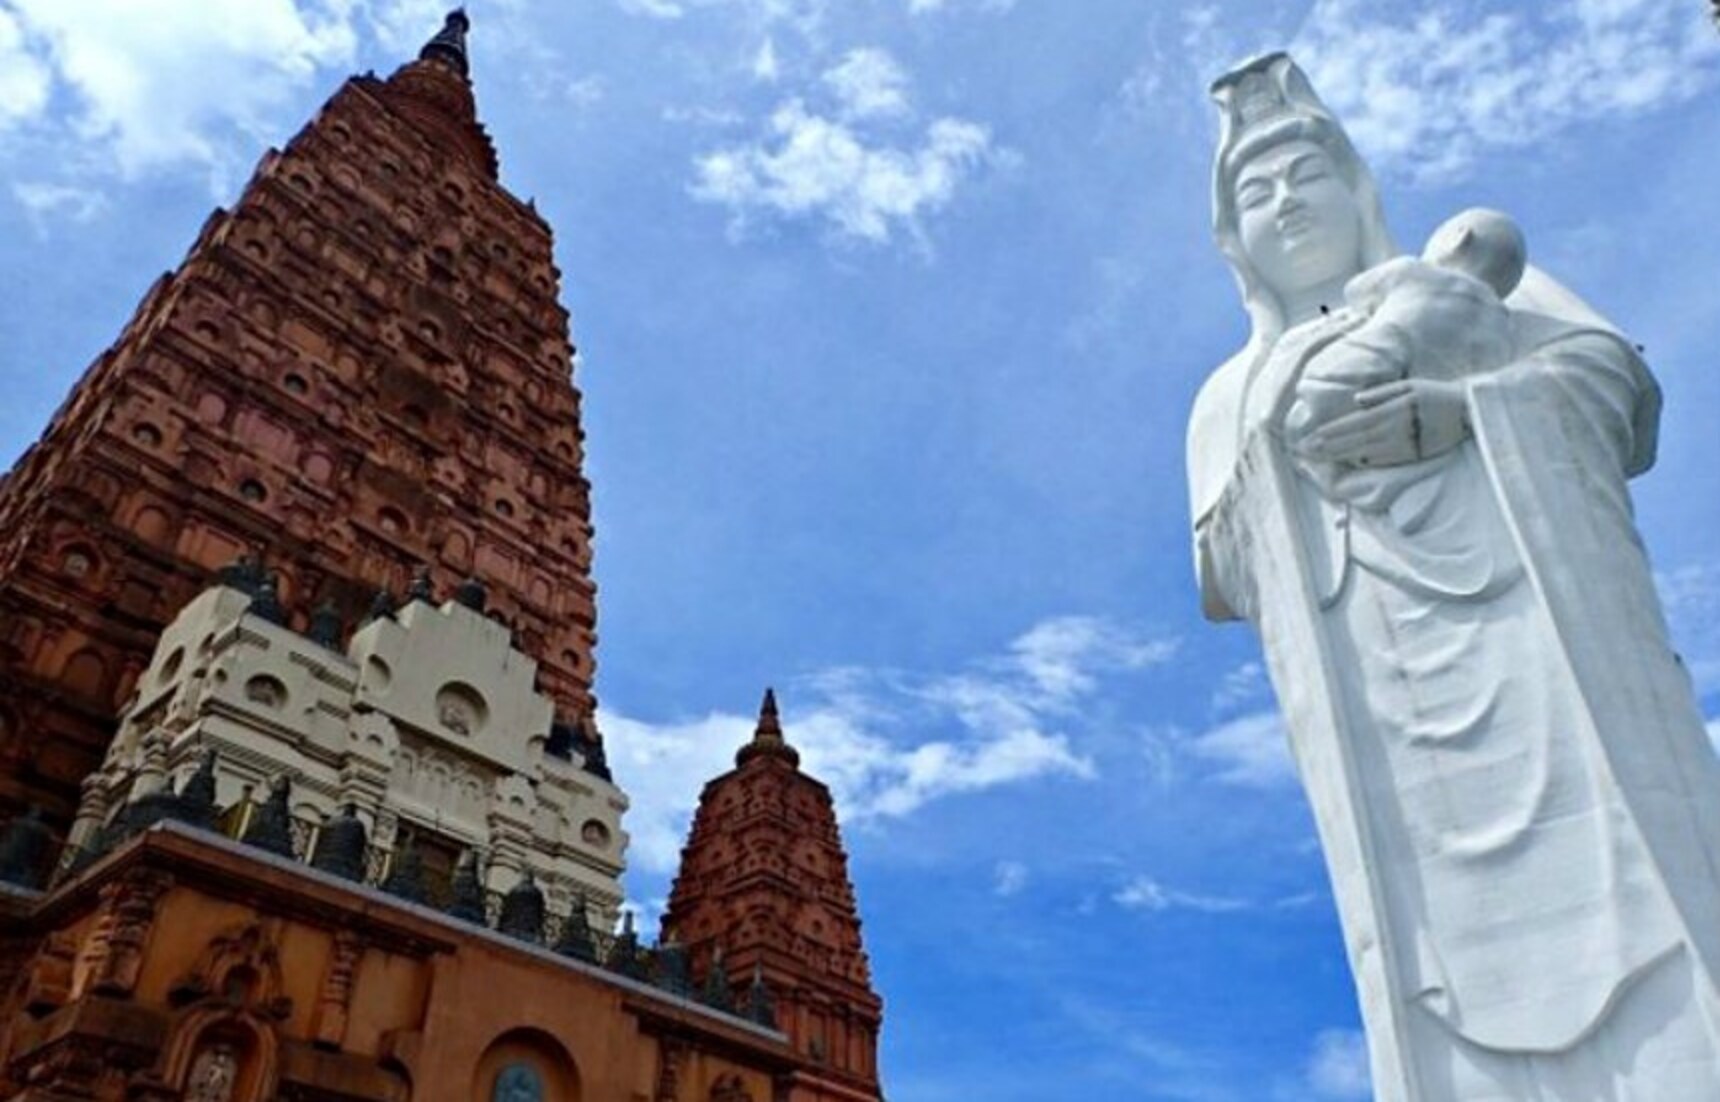 These Towering Statues Take the Cake